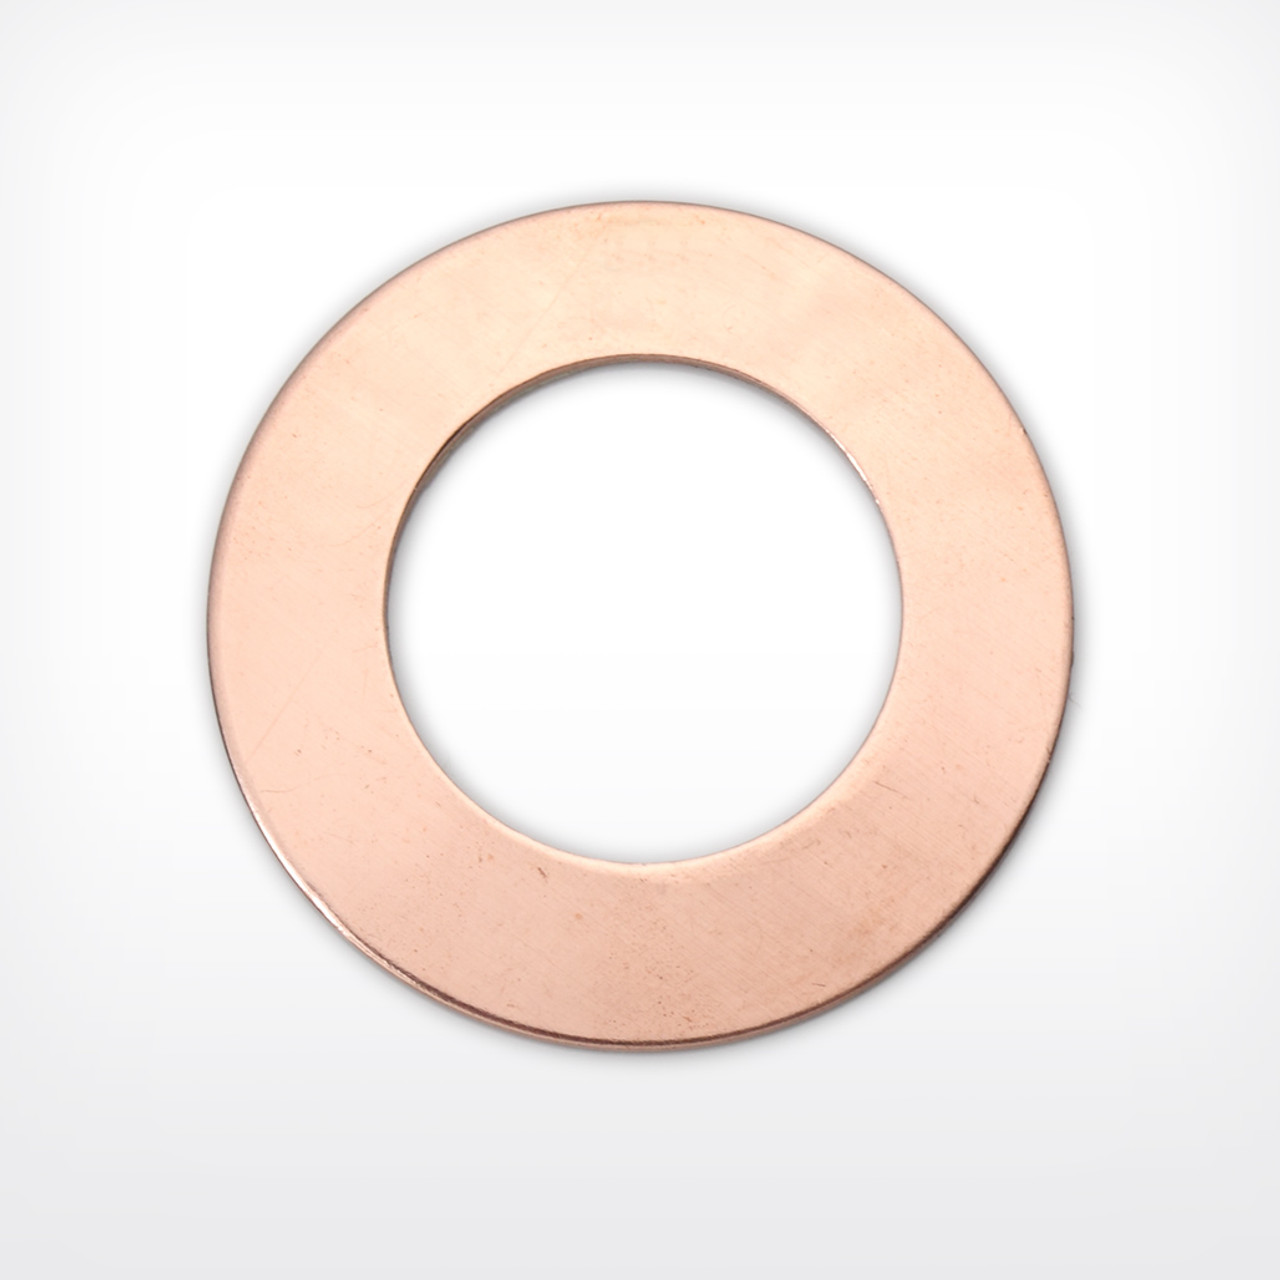 Copper Blank Disc Stamped Shape for Enamelling & Other Crafts